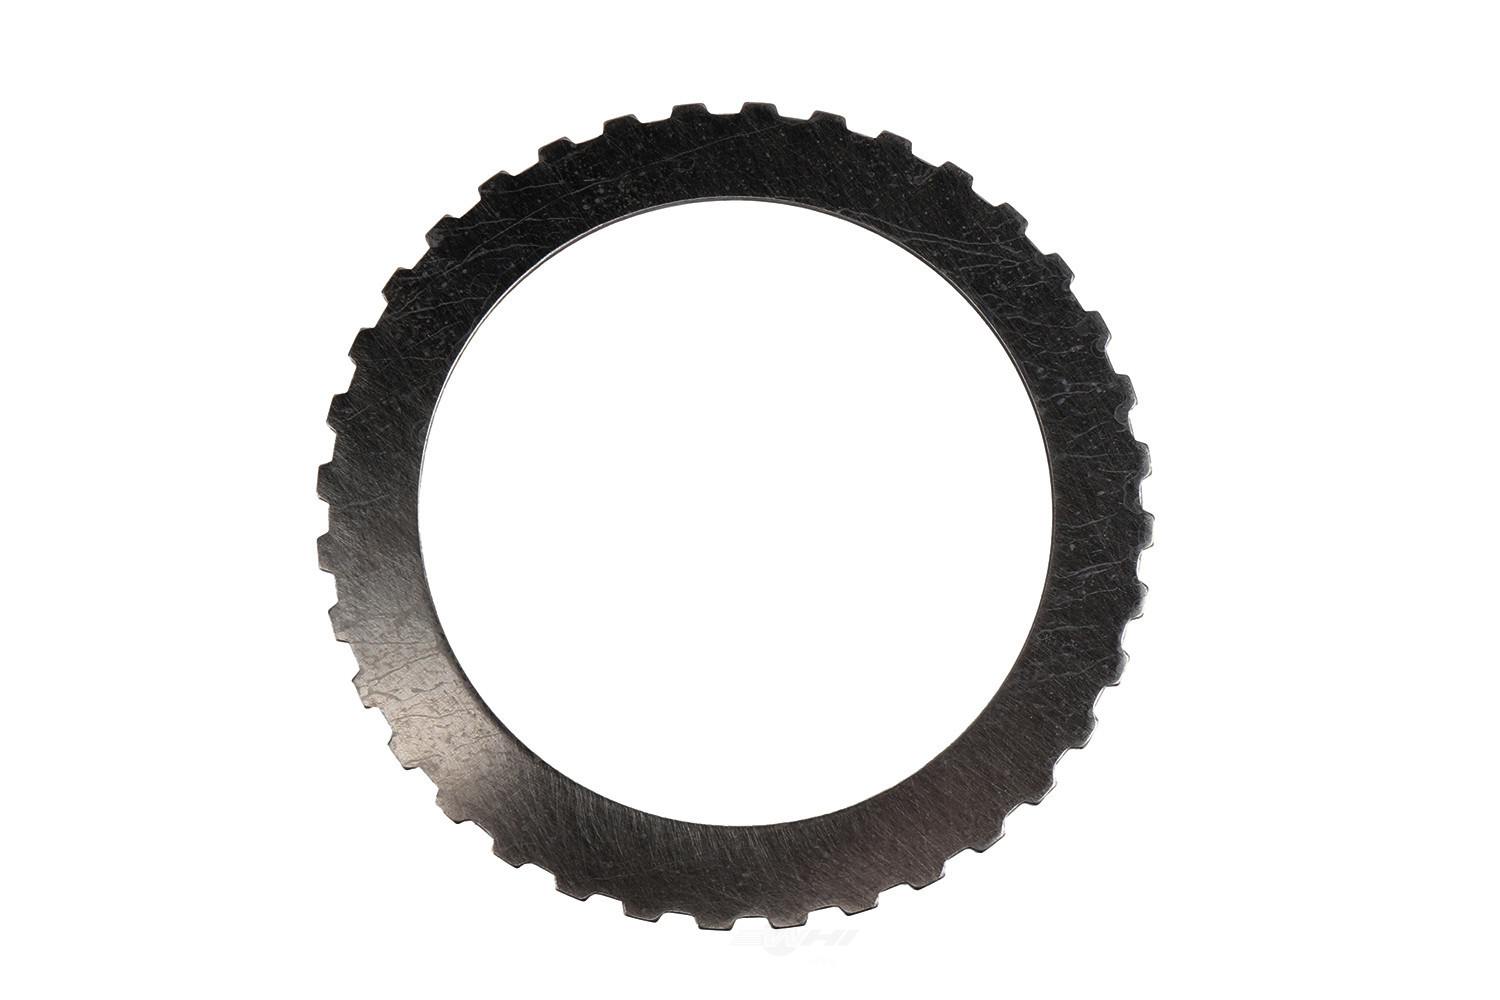 GM GENUINE PARTS - Transmission Clutch Friction Plate - GMP 24258070